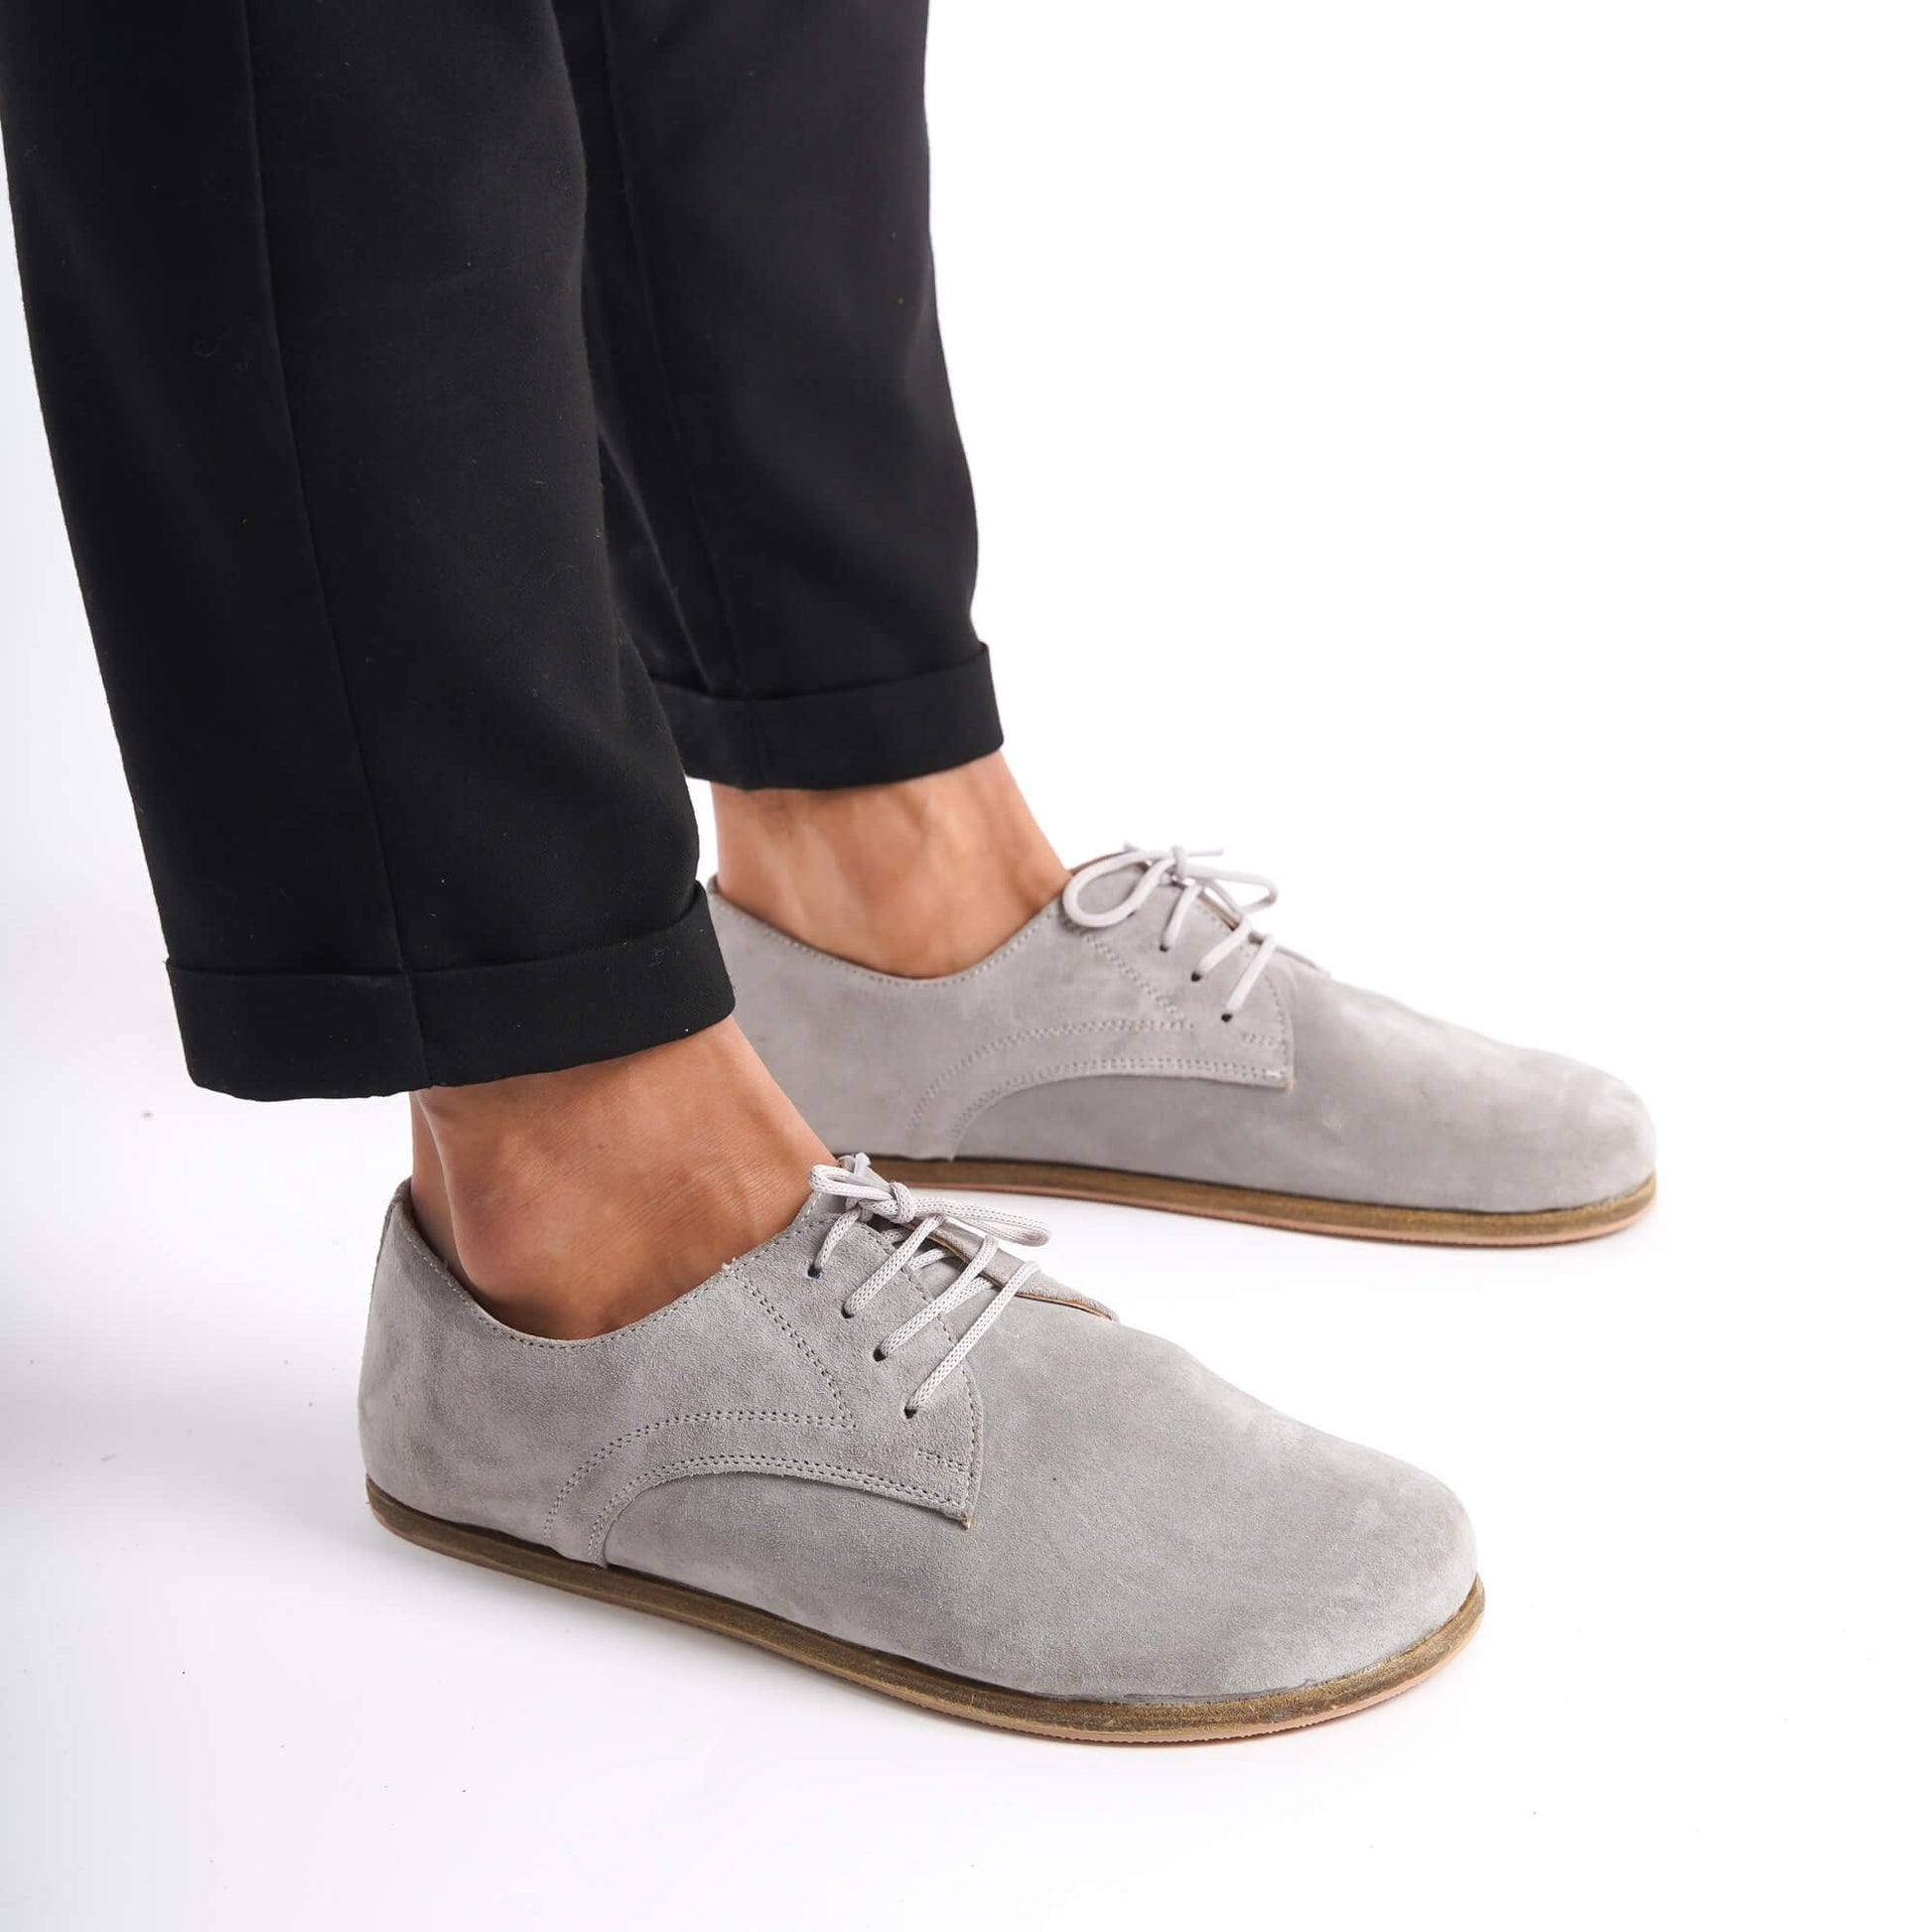 Top-down view of Locris Leather Barefoot Men's Oxfords in gray suede, paired with gray socks, emphasizing their unique style.